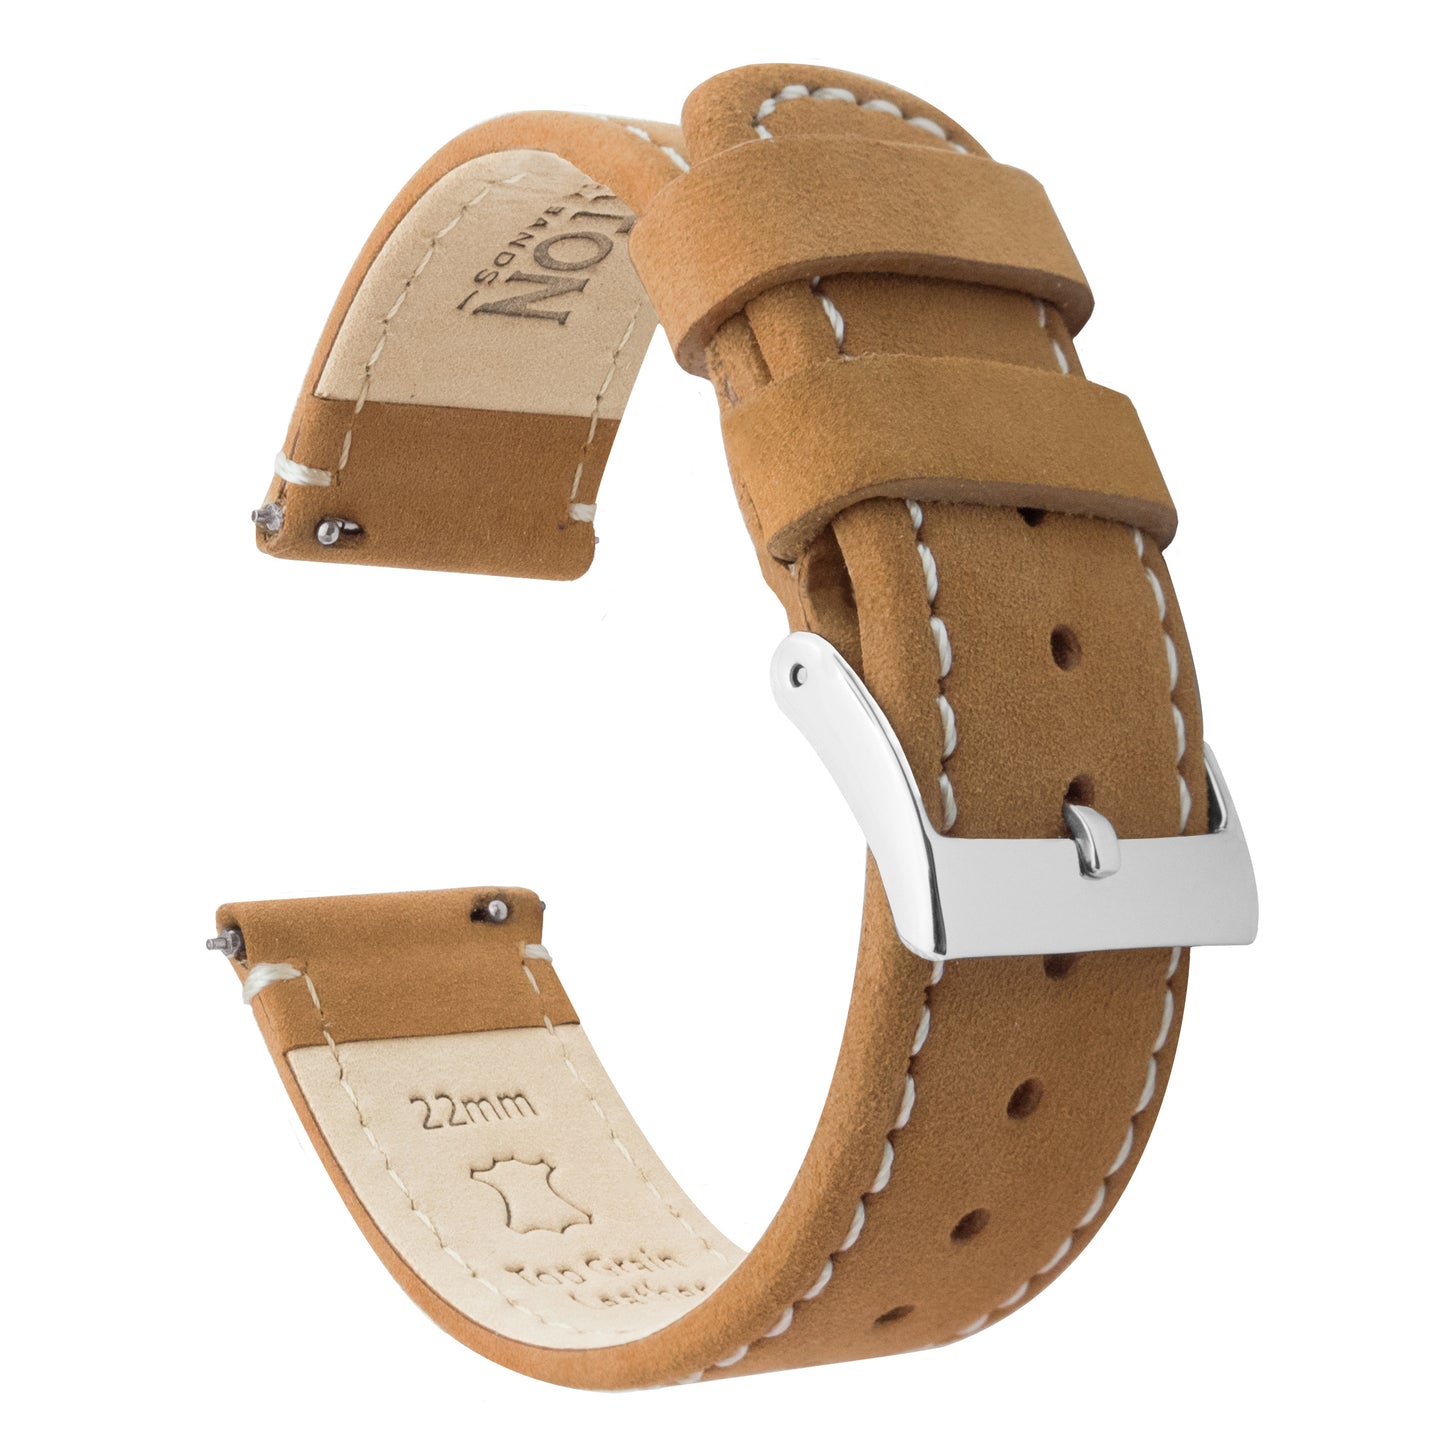 Fossil Sport | Gingerbread Brown Leather & Linen White Stitching - Barton Watch Bands